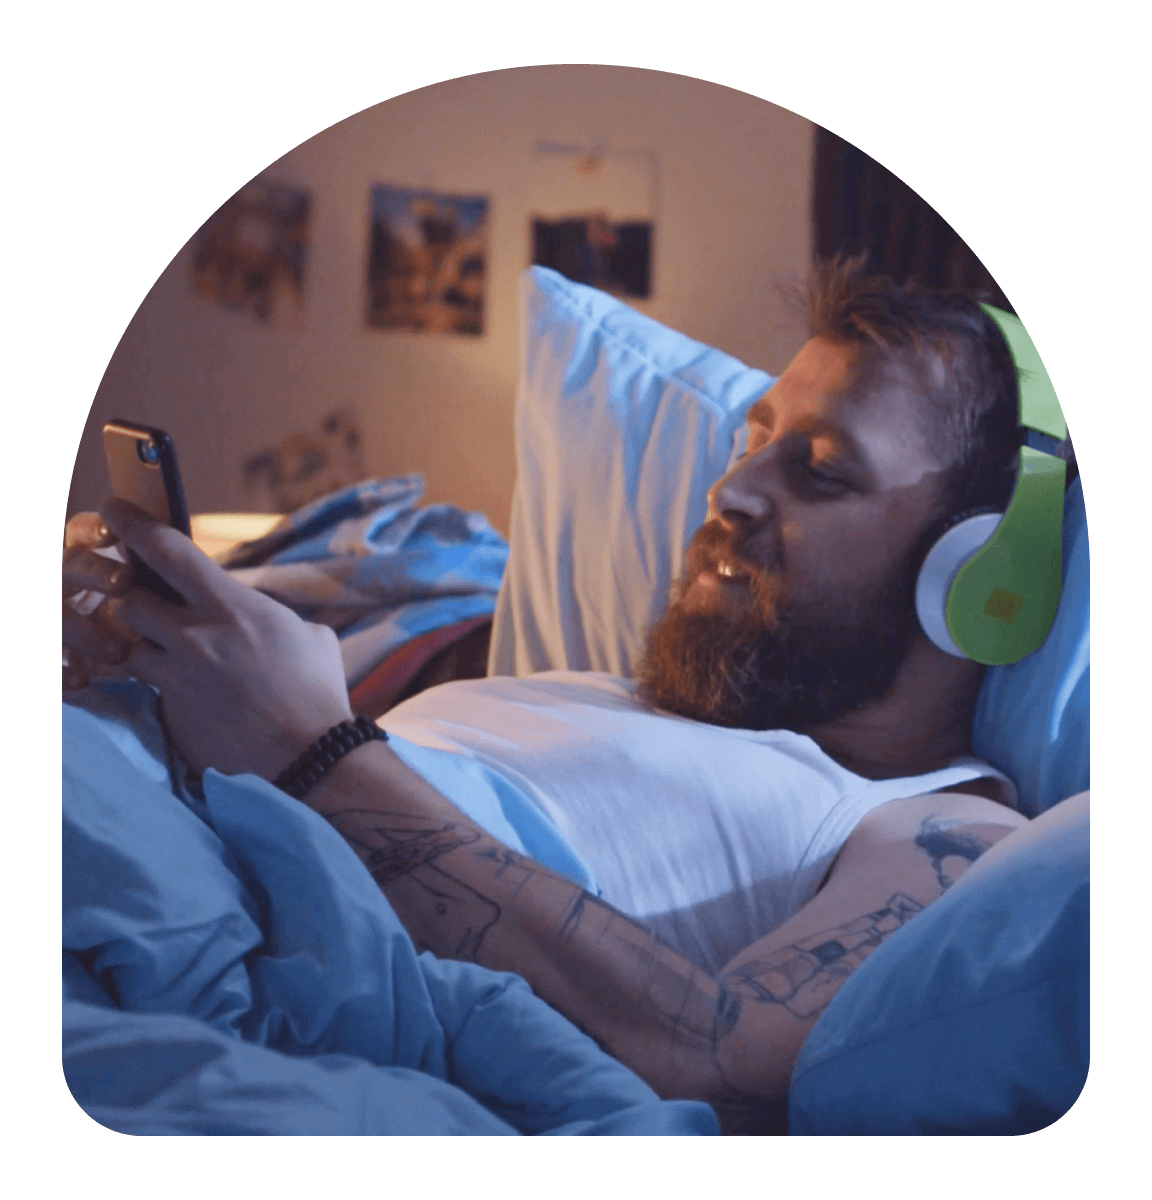 Highlight other man with phone in bed